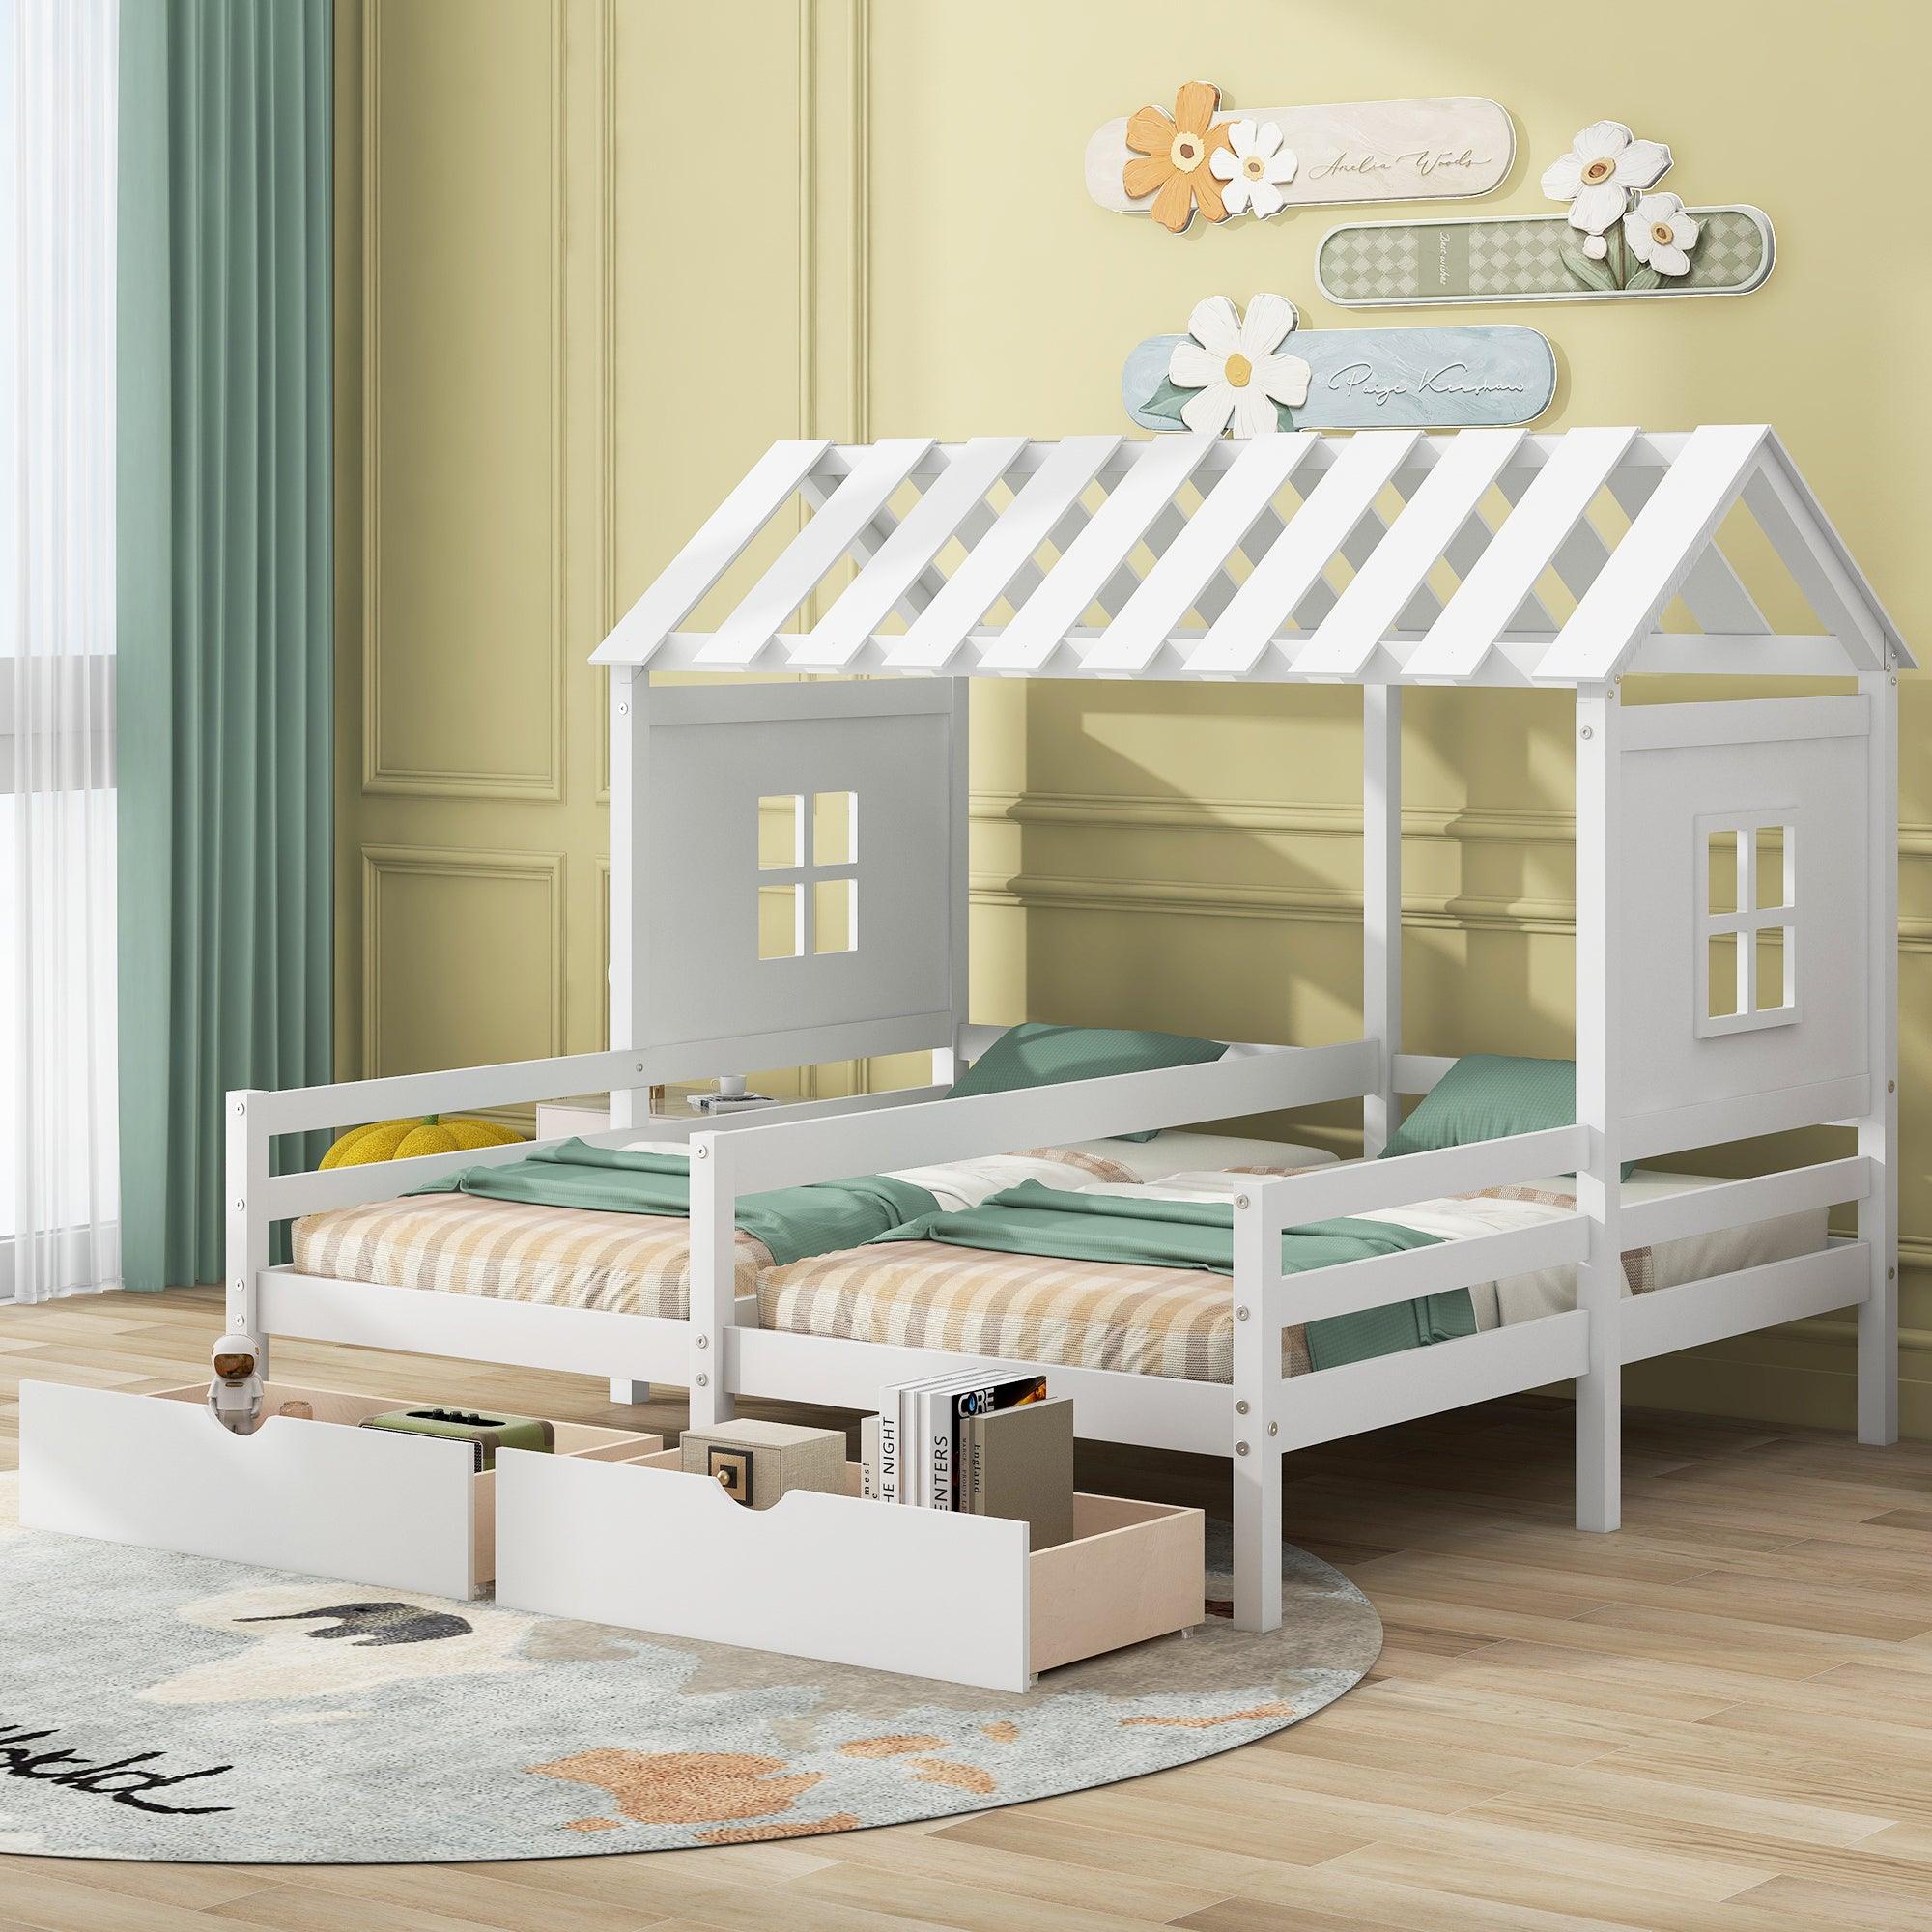 🆓🚛 Twin Size House Platform Beds With Two Drawers Shared Beds, Combination Of 2 Side By Side Twin Size Beds, White